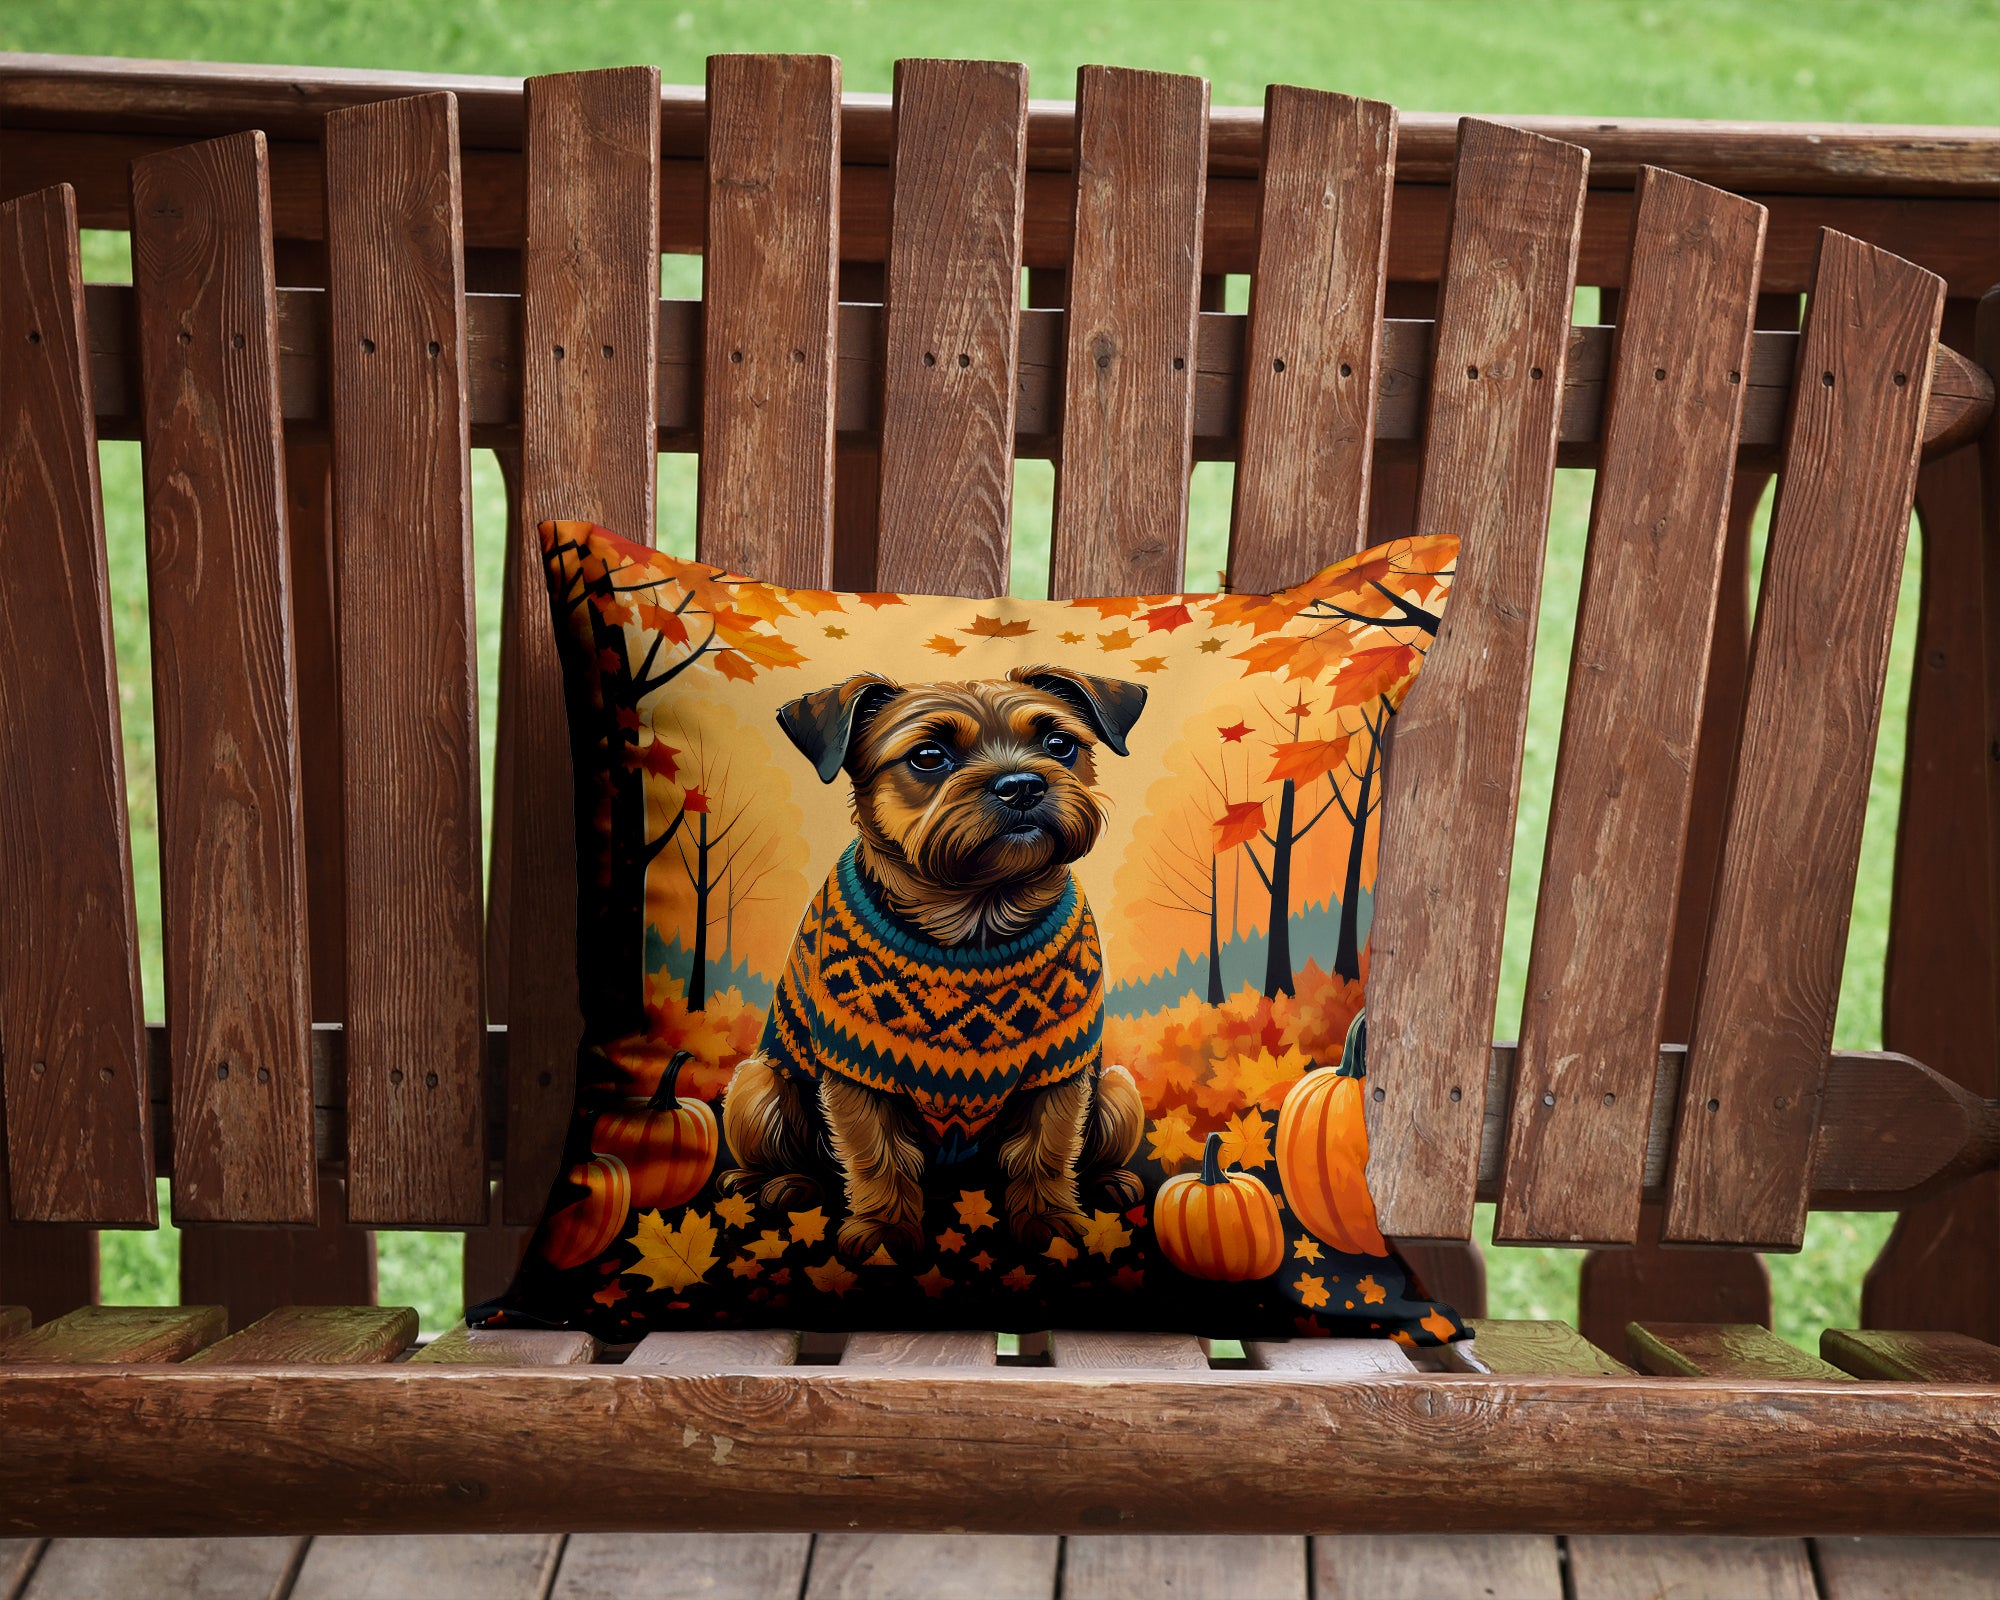 Buy this Border Terrier Fall Fabric Decorative Pillow